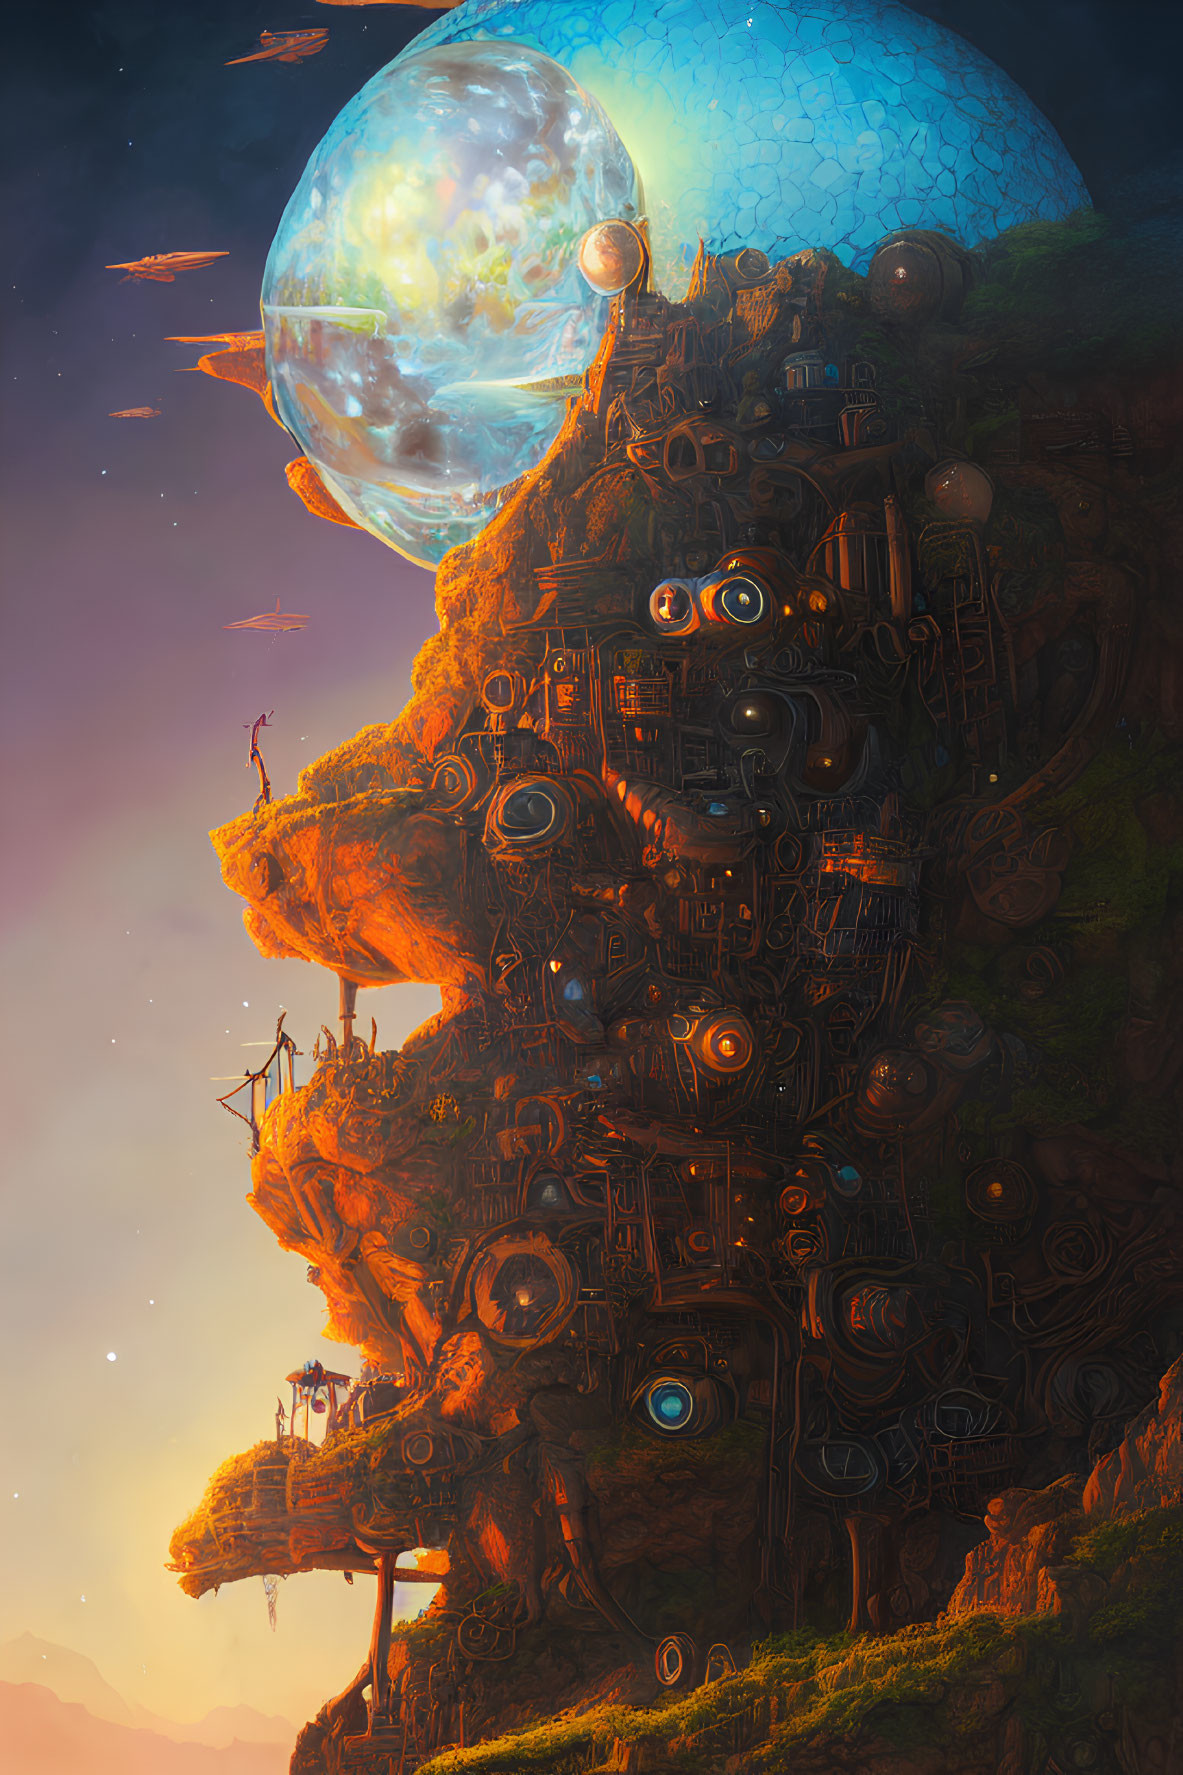 Surreal floating island with intricate machinery under vast cosmos